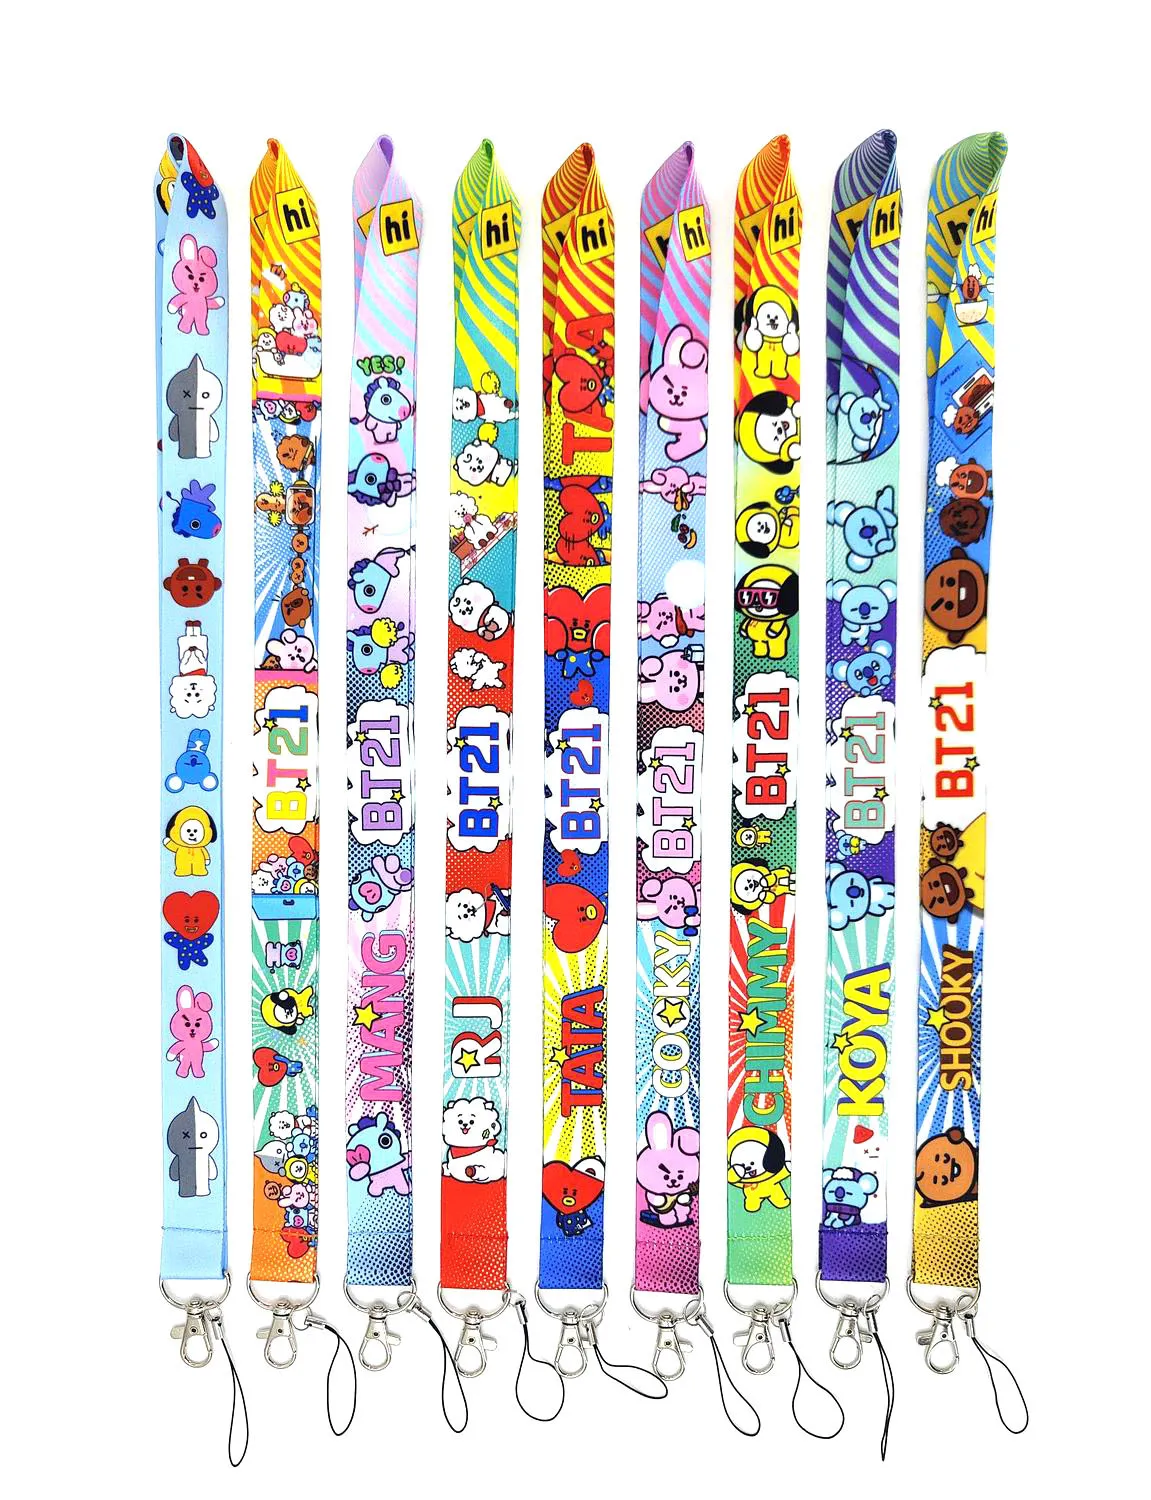 Anime BTS21 Cartoon Lanyard For Keychain ID Card Cover Pass student Badge Holder Key Ring Neck Straps Accessories